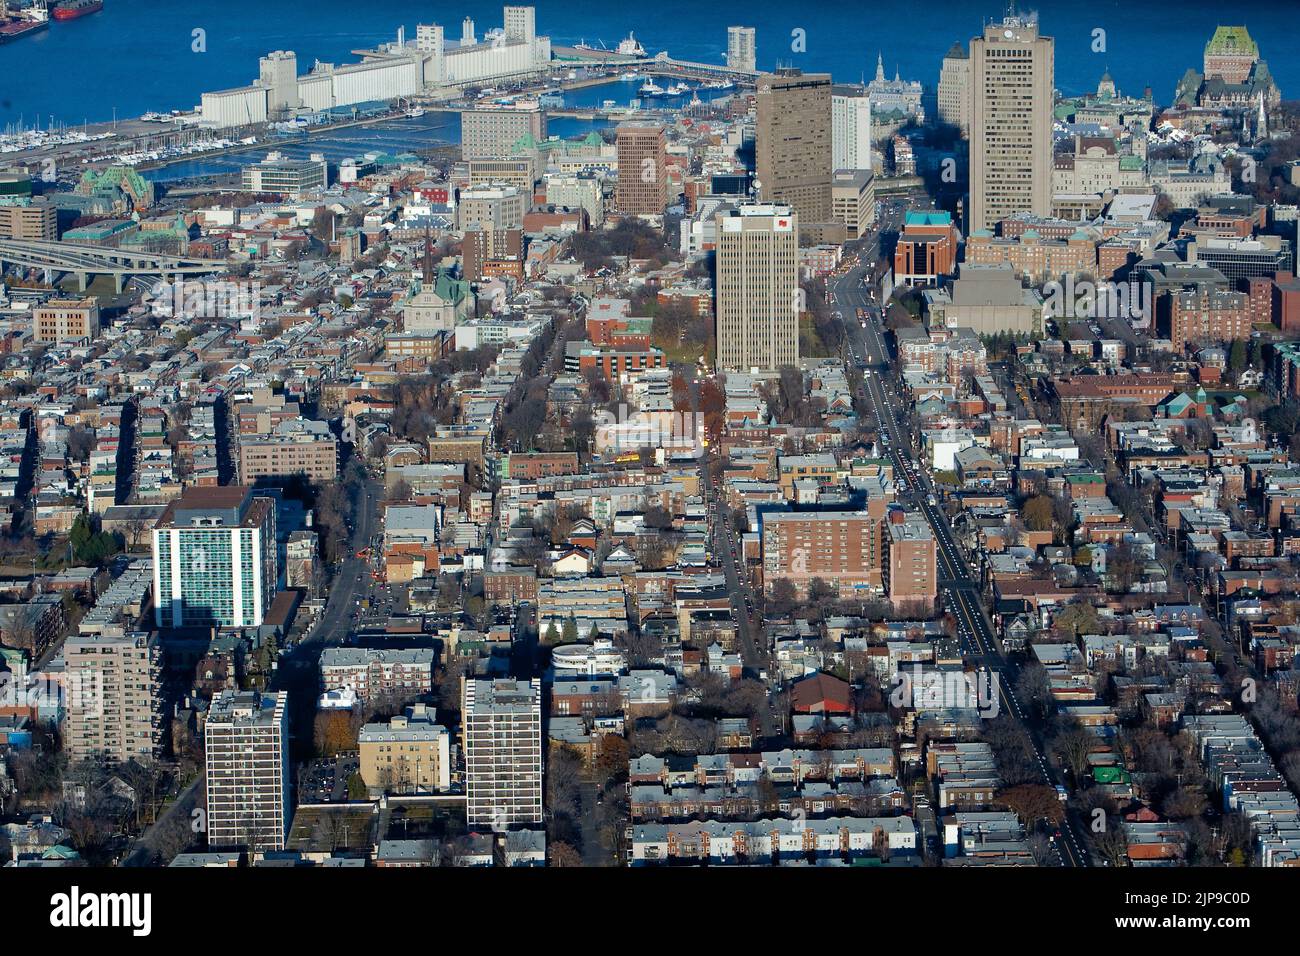 Quebec city's skyline is pictured from West to East in this aerial photo November 11, 2009. In this picture can be seen St-Jean-Baptiste district, Montcalm district Complexe G (edifice Marie-Guyard), Hotel Delta, Hotel Hilton, Chateau Frontenac, Bunge grain Silo and the St-Lawrence river. Stock Photo